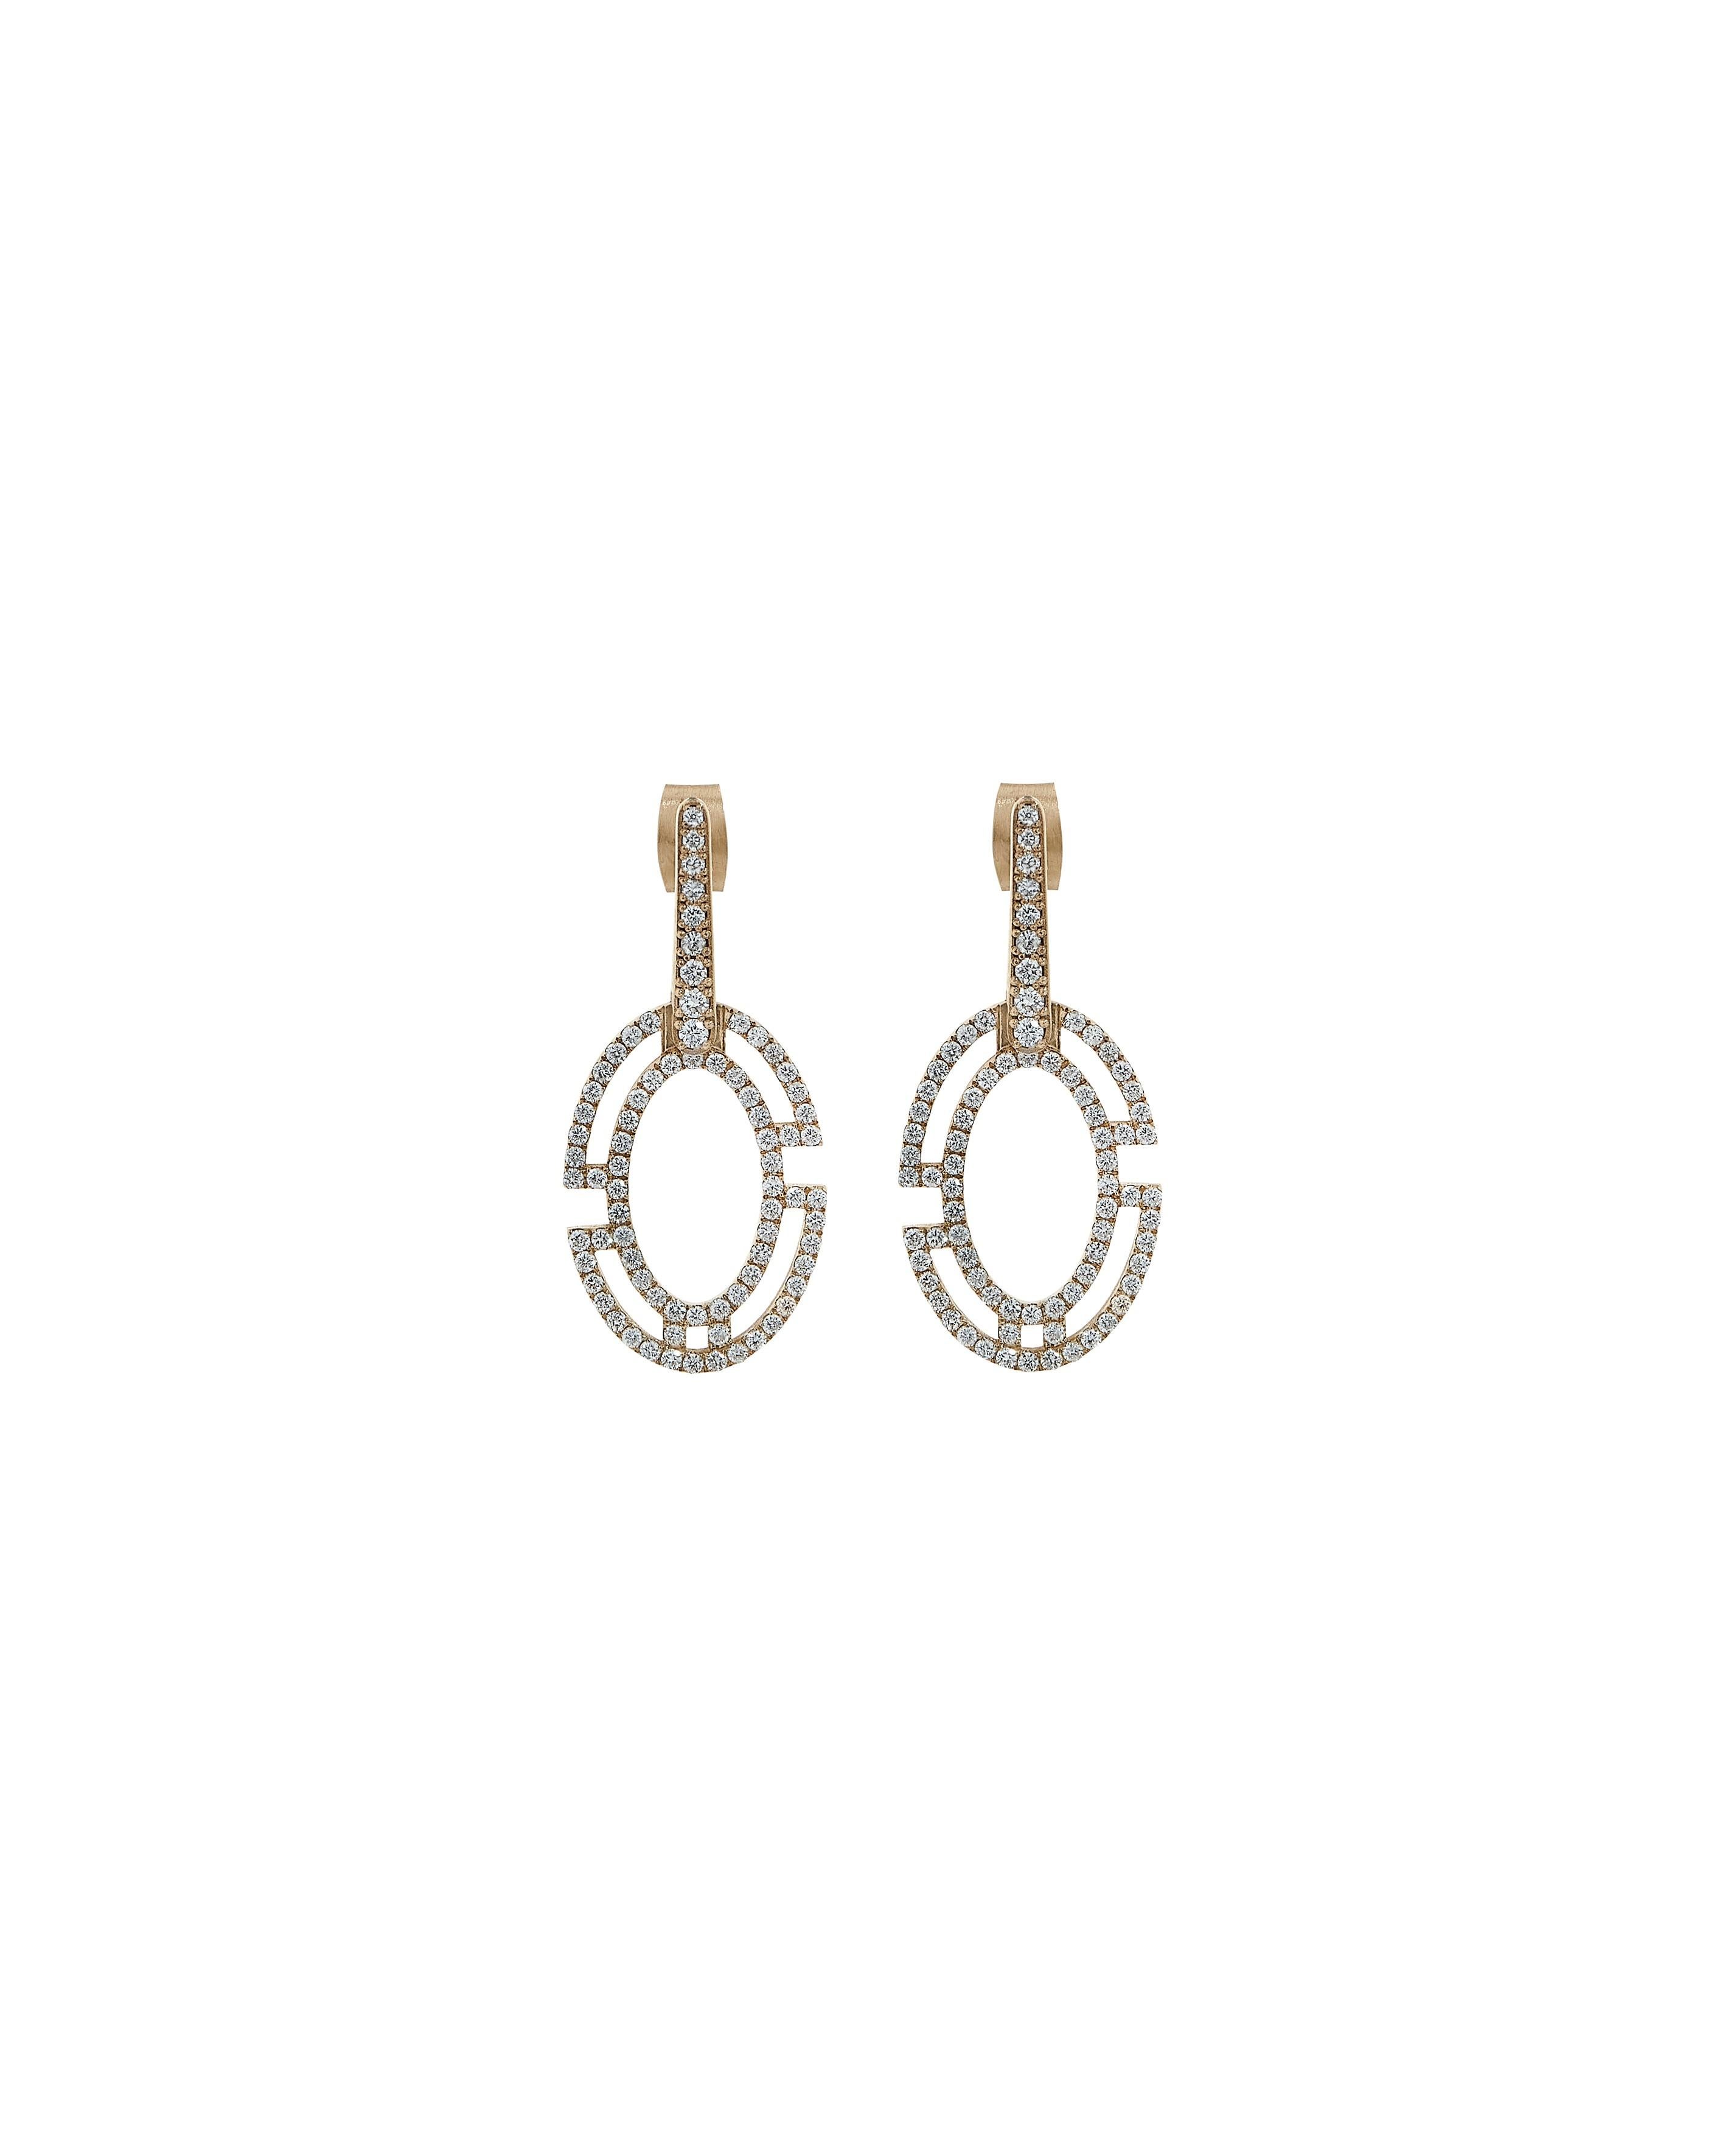 These earrings from POLINA ELLIS' BYZANTIUM collection are handcrafted in 18K raw white gold with 0,84ct white brilliant cut diamonds.
Length: 3,10cm
Width: 1,40cm